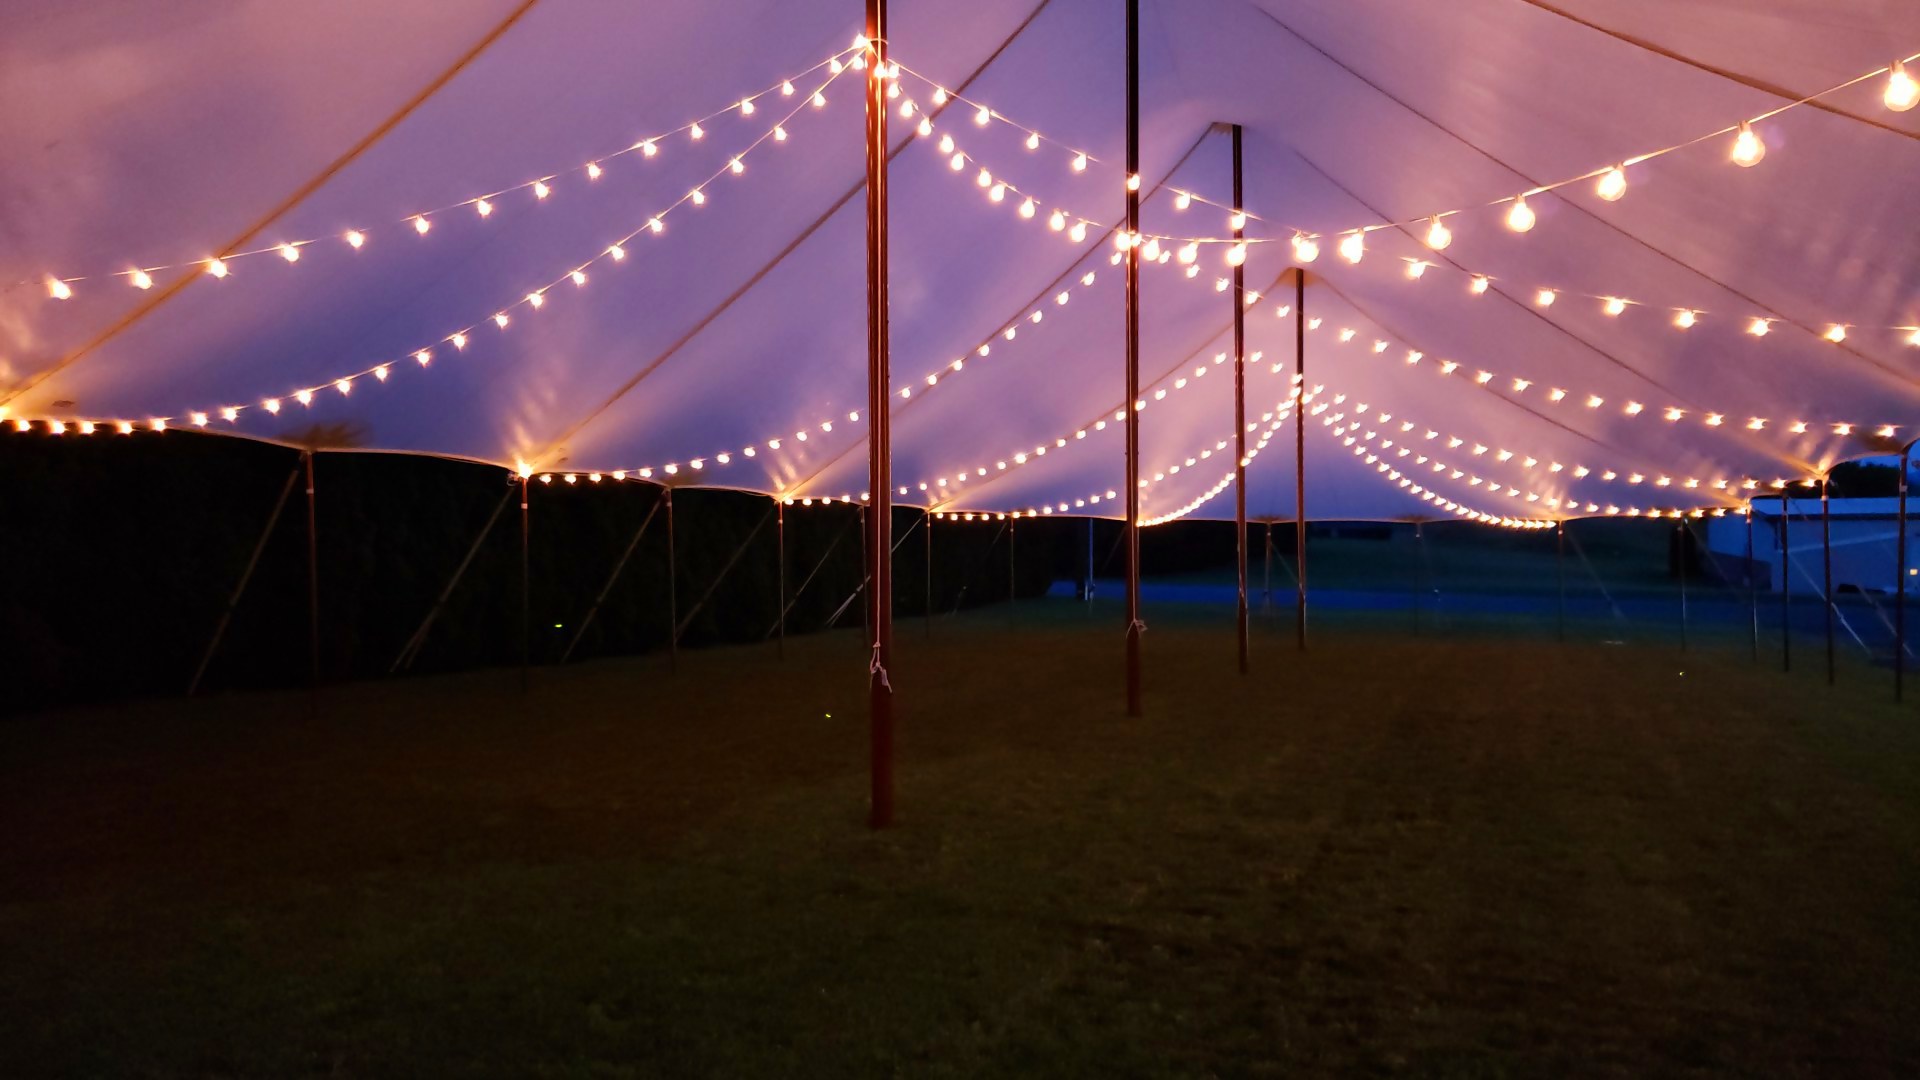 Cafe lights in a sailcloth tent